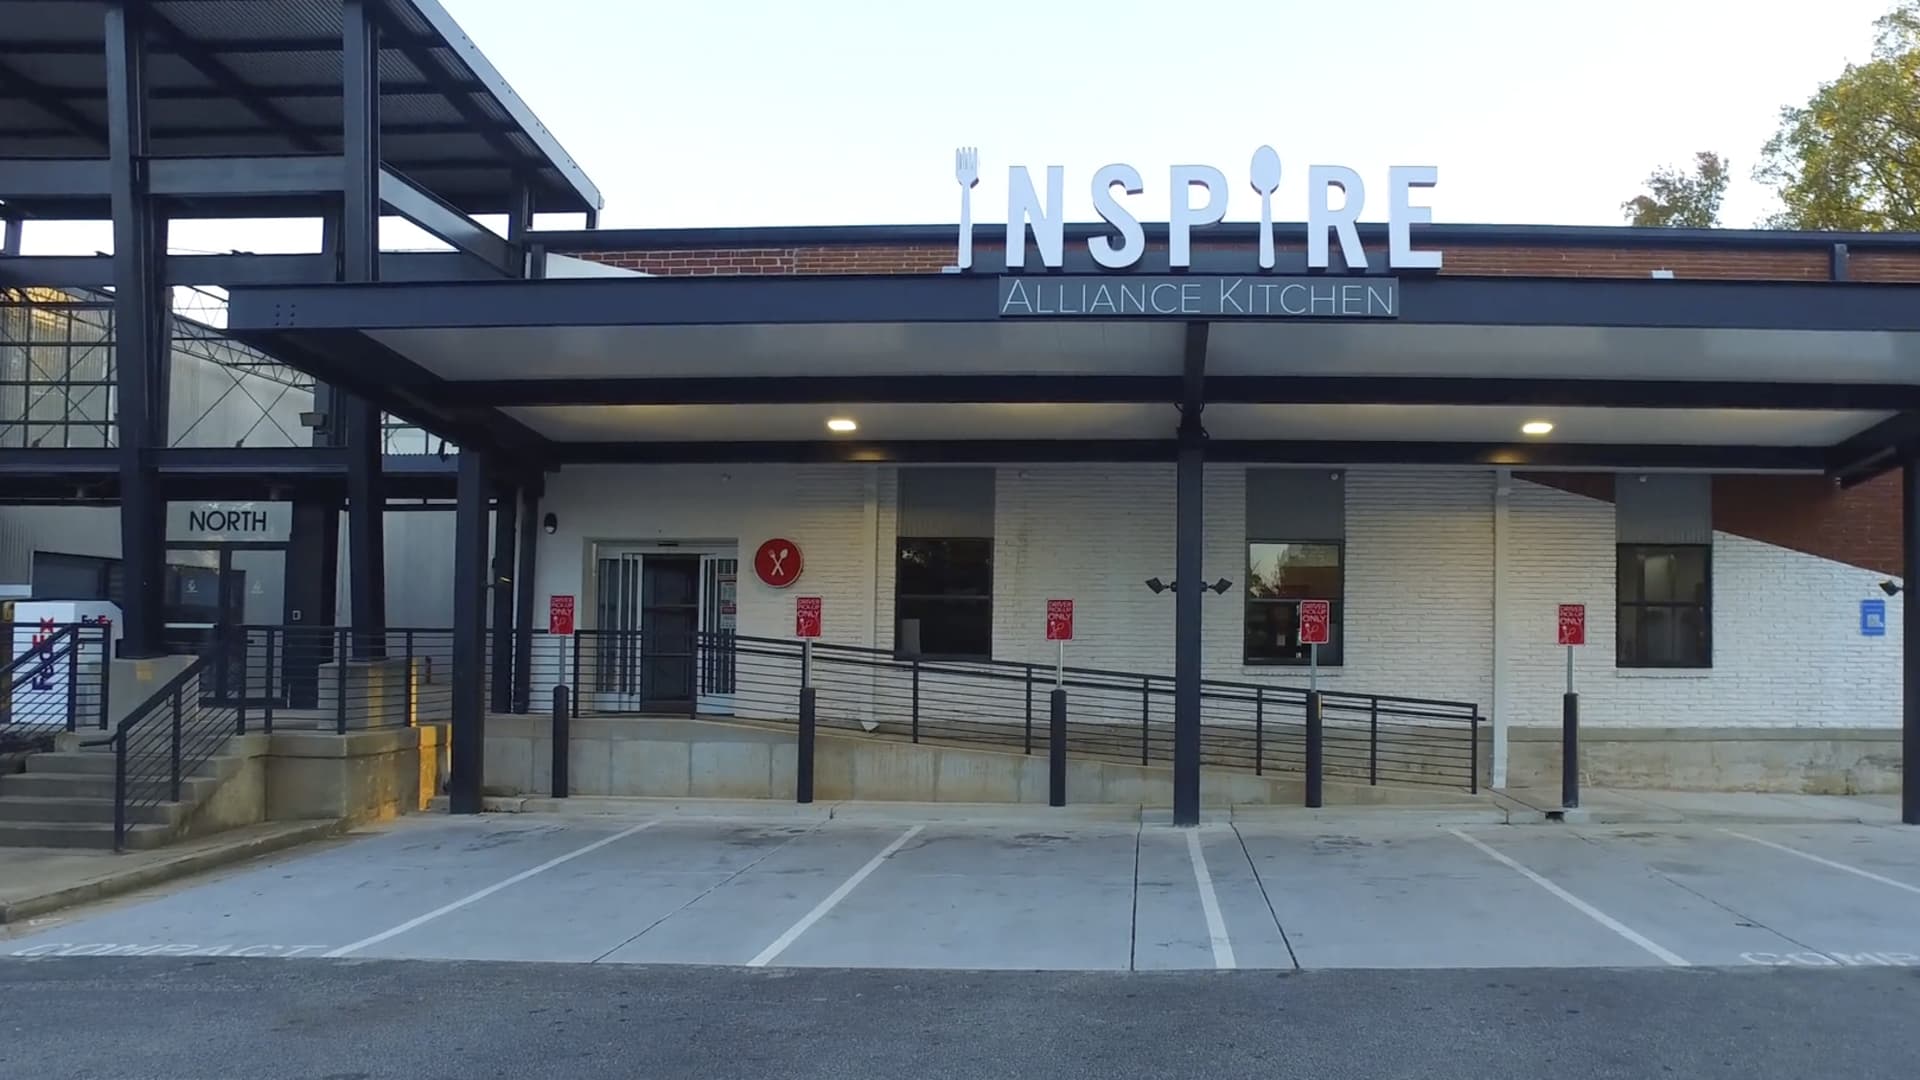 Inspire Brands has launched the Alliance Kitchen, a multi-brand ghost kitchen located in Atlanta offering favorite menu items from Arby's, Buffalo Wild Wings, Jimmy John's, SONIC Drive-In, and for the first time in the area Rusty Taco.